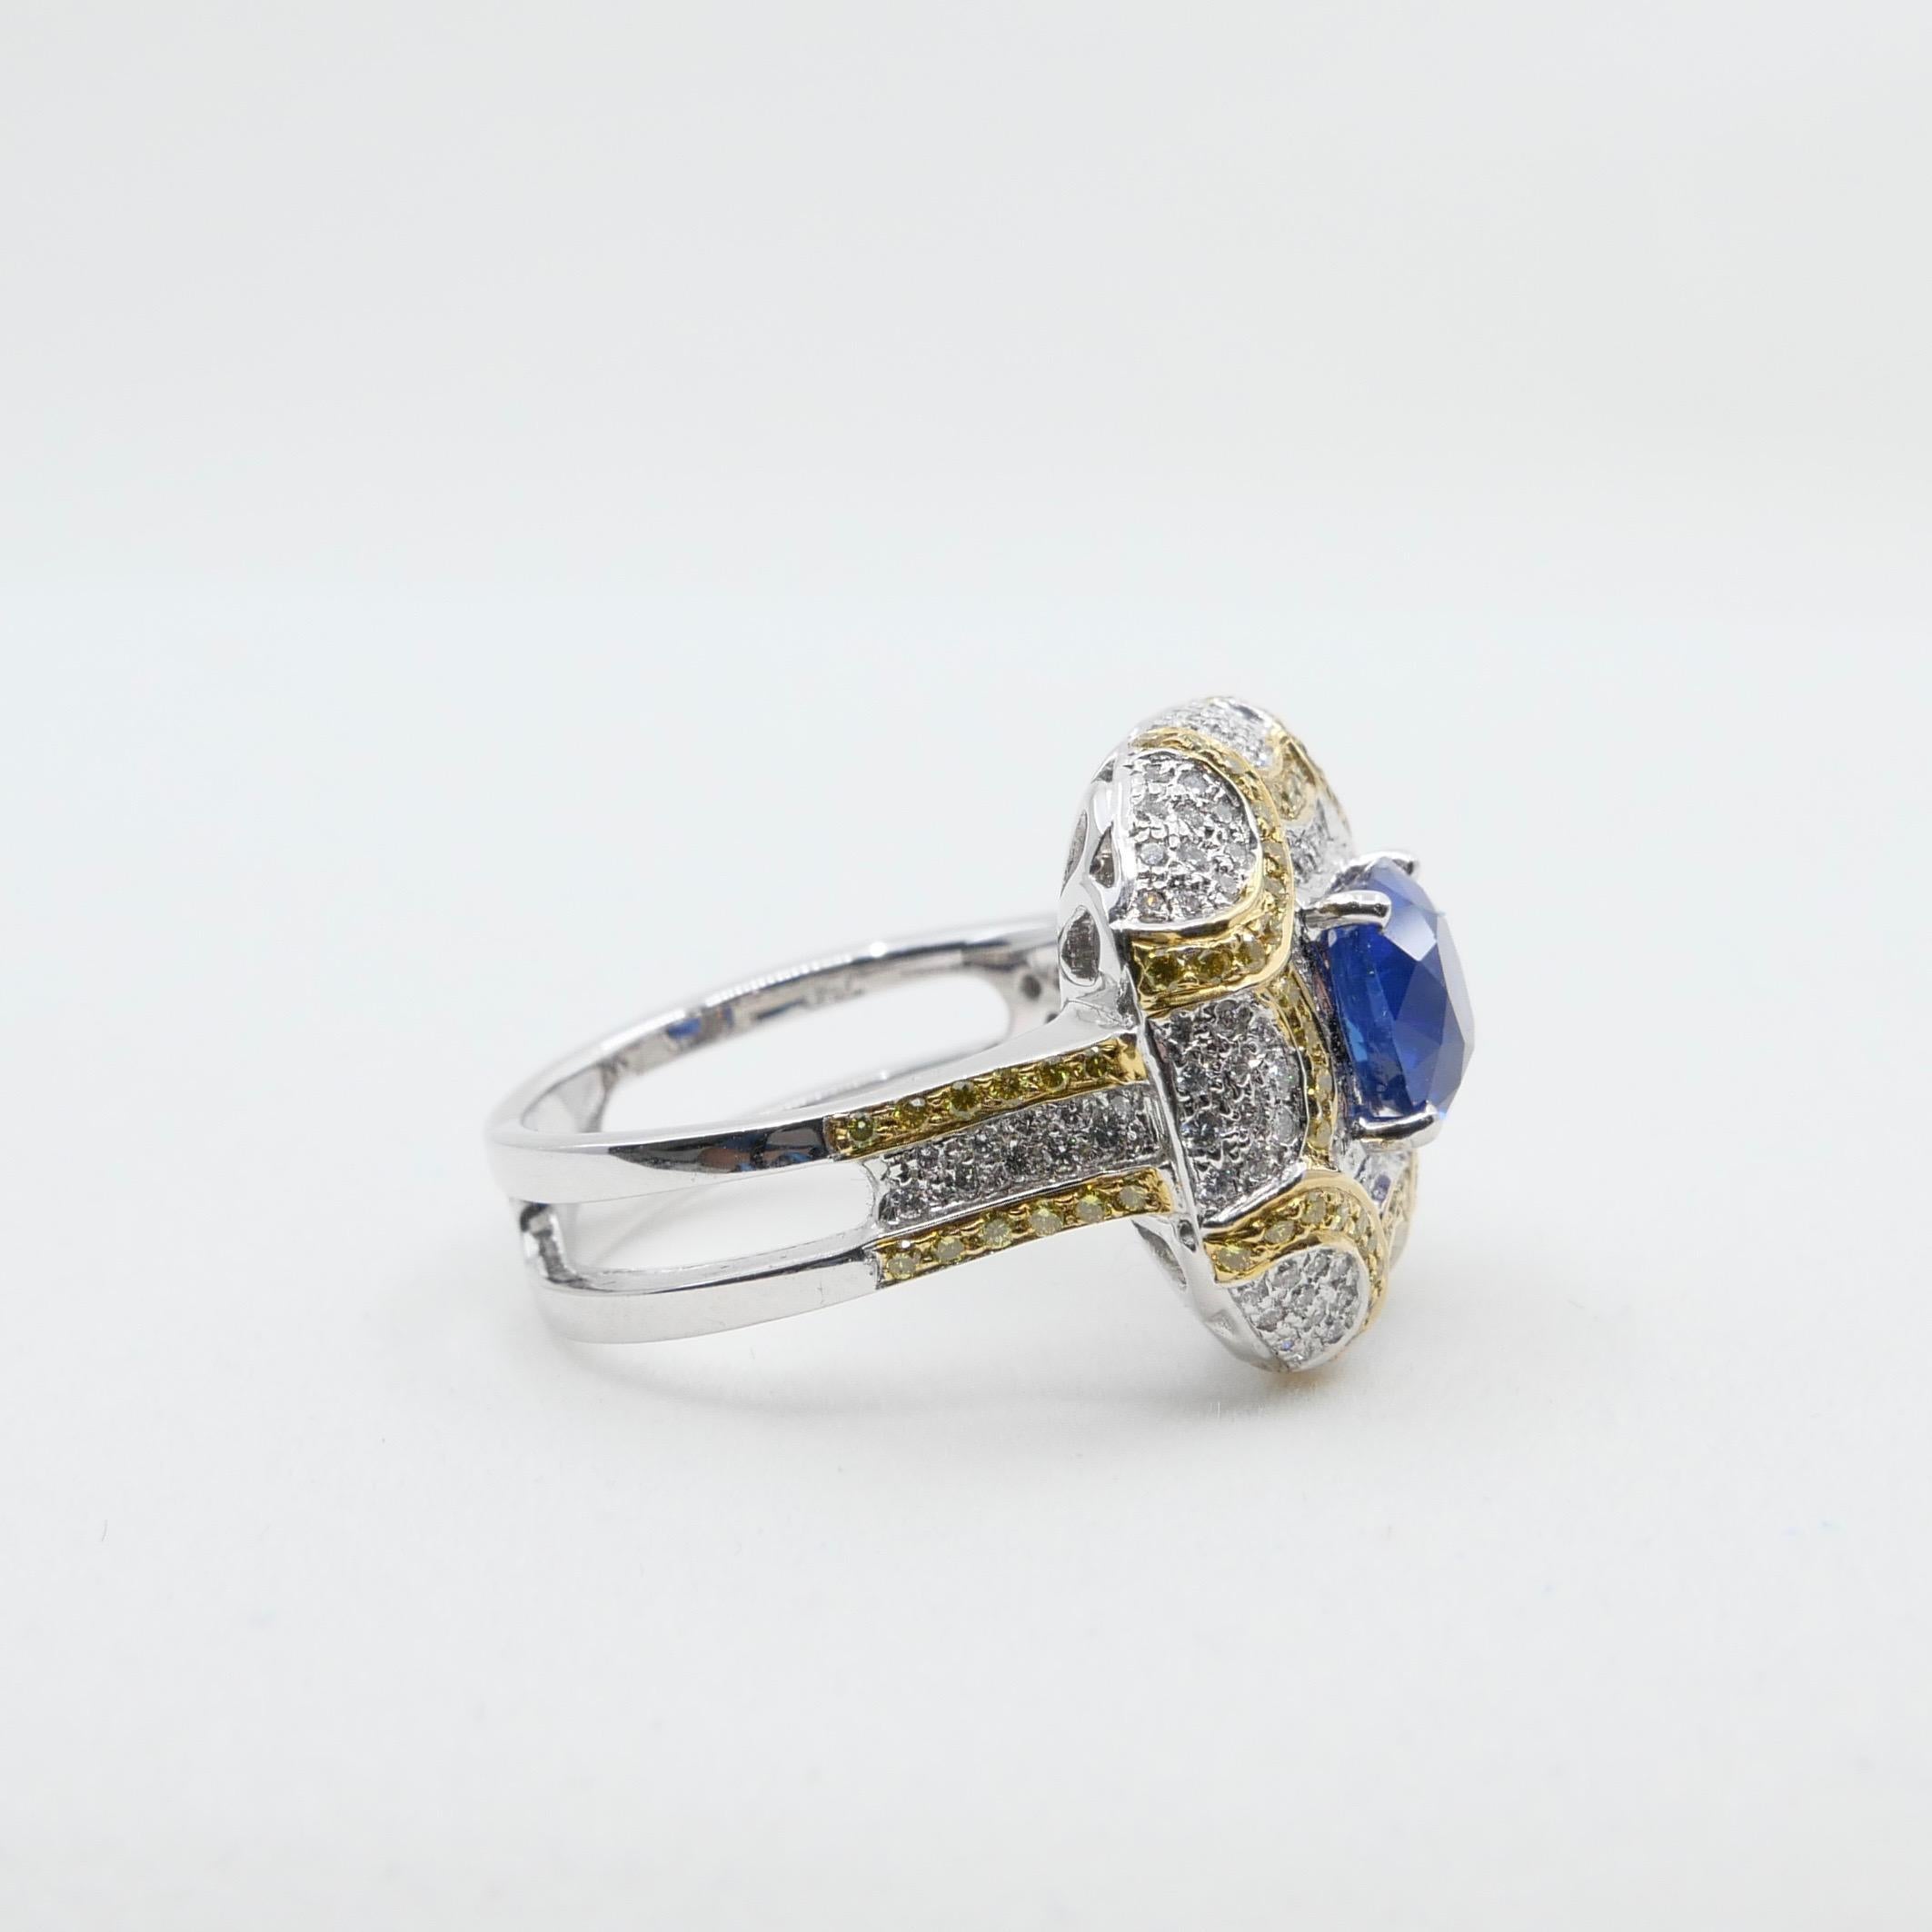 ICA Certified 1.74Cts Ceylon Heat Sapphire Ring, White and Fancy Yellow Diamonds For Sale 6